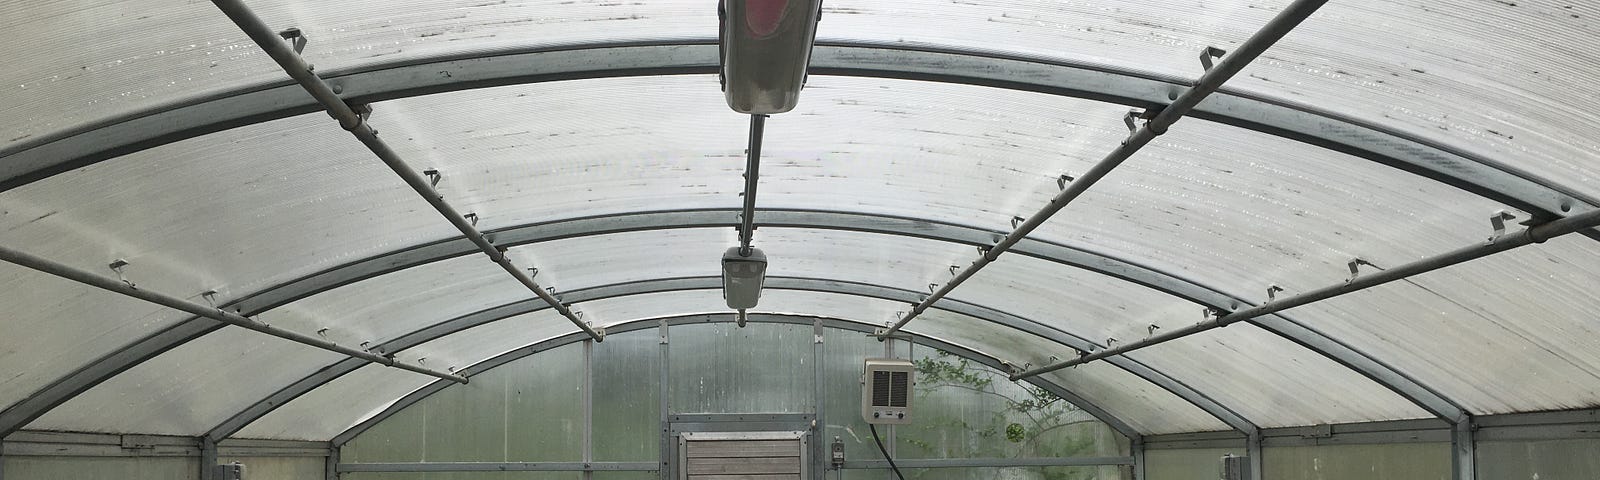 A view of the interior of a greenhouse